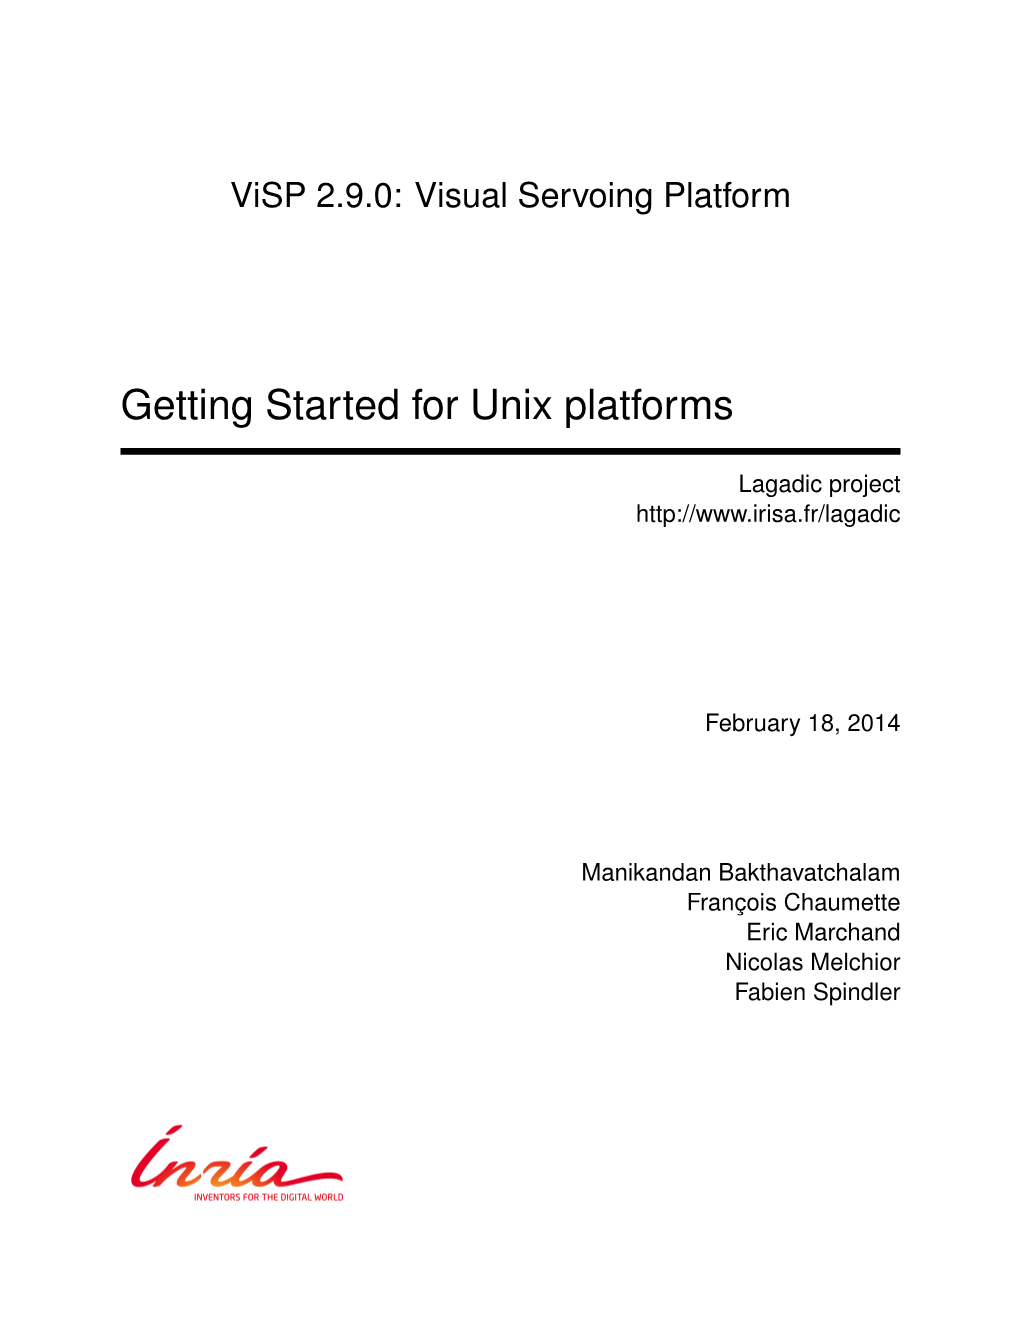 Getting Started for Unix Platforms